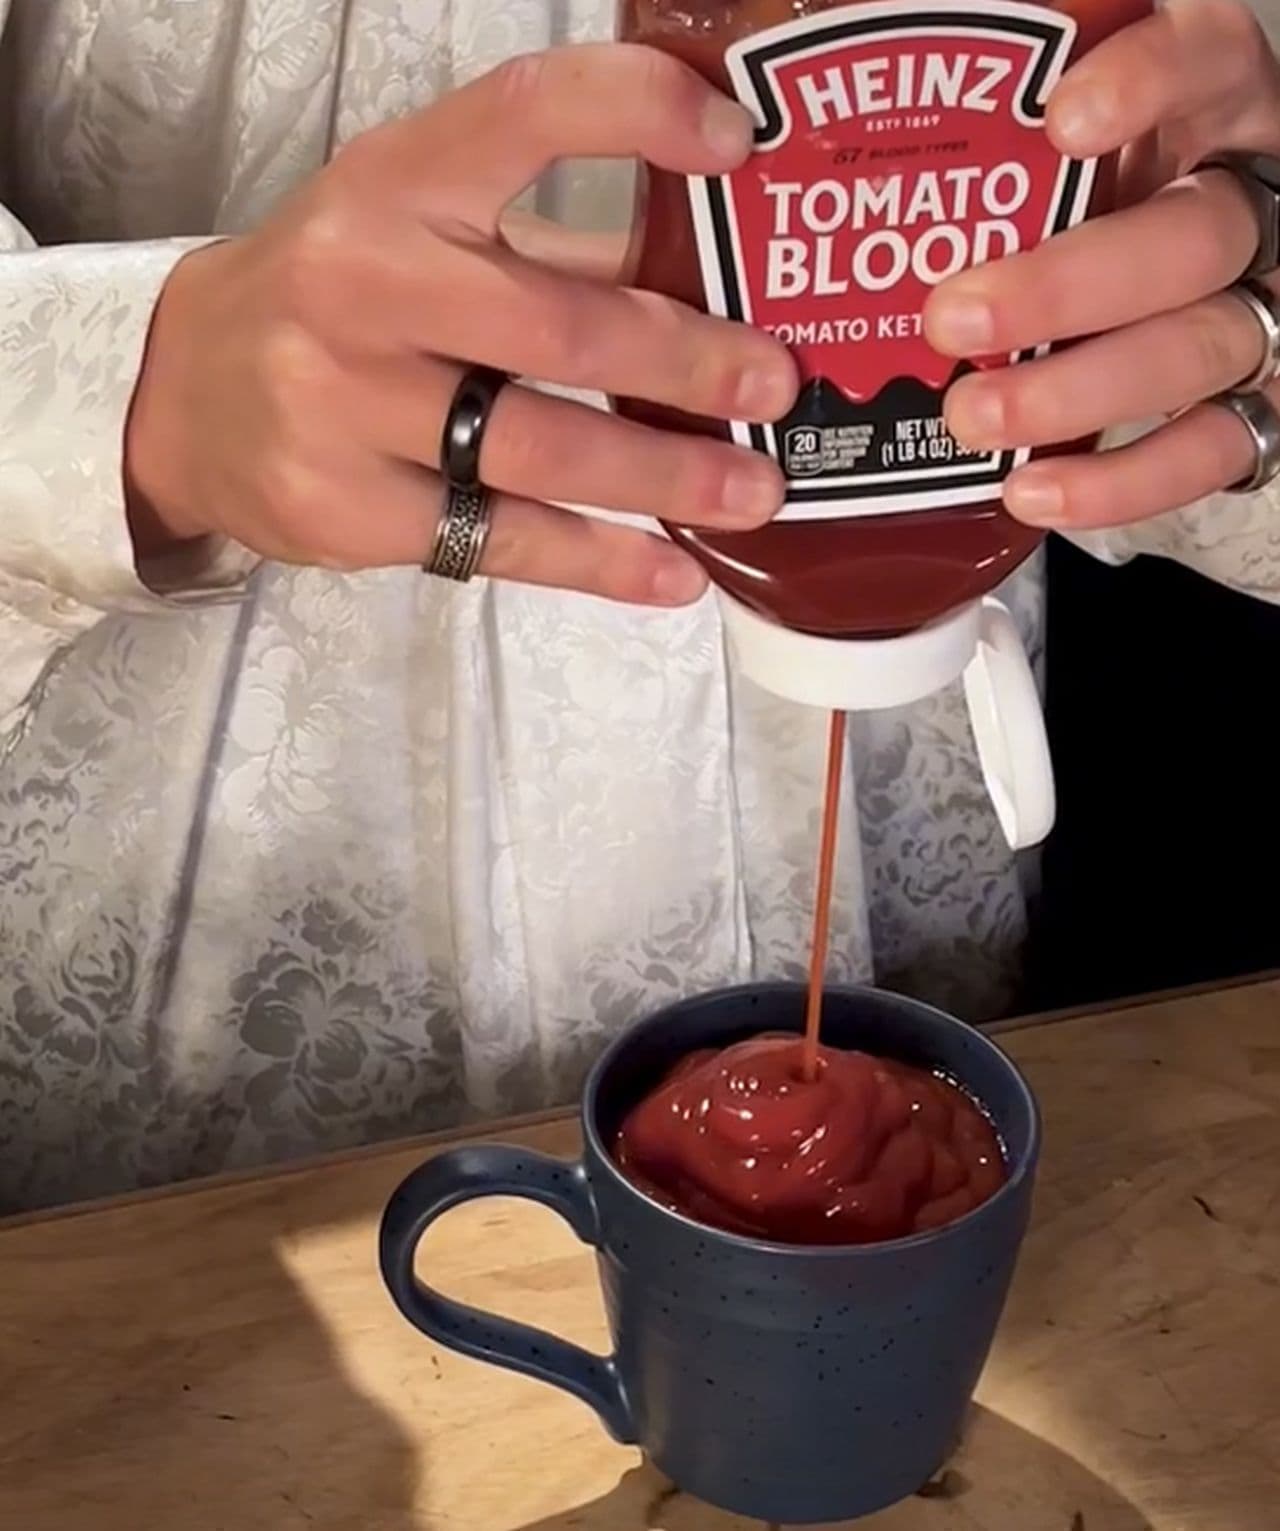 Heinz launches Tomato Blood Ketchup in the U.S. for the Halloween season.